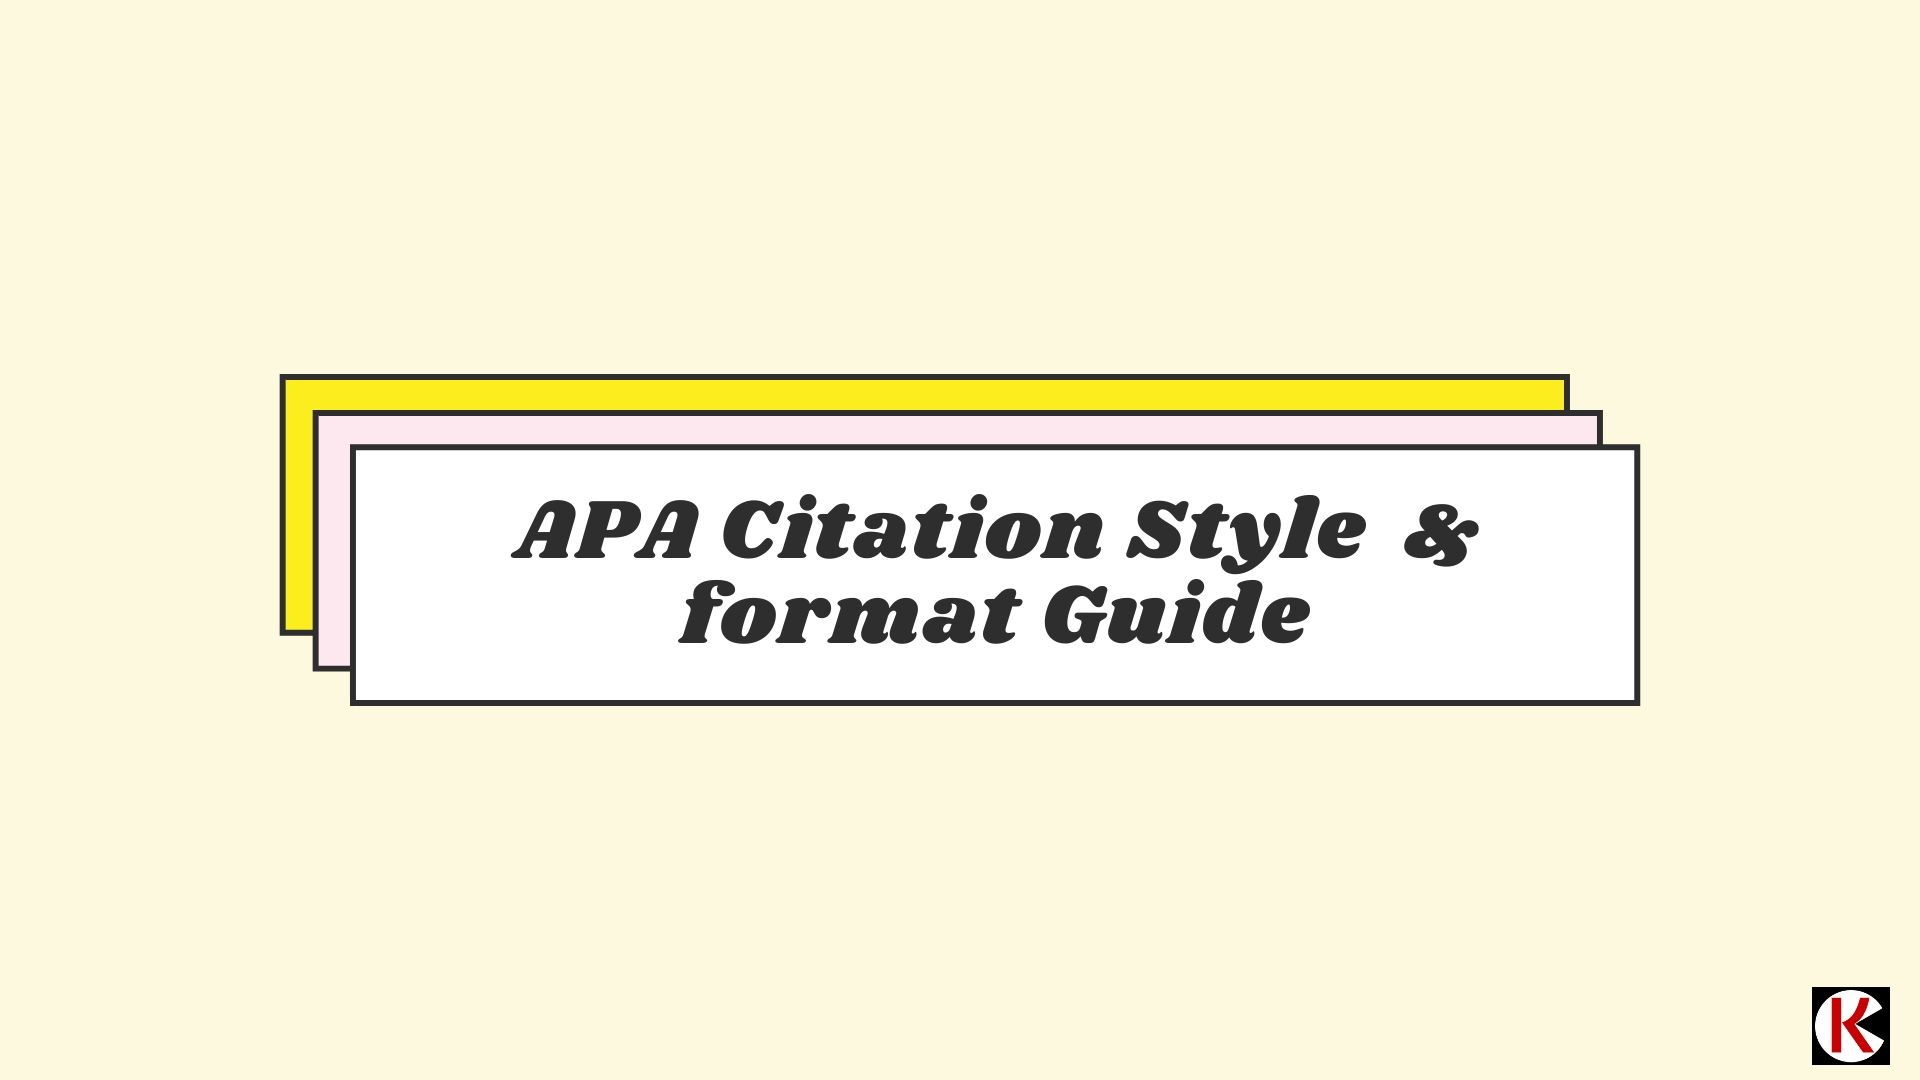 APA Citation Style Guide and sample paper